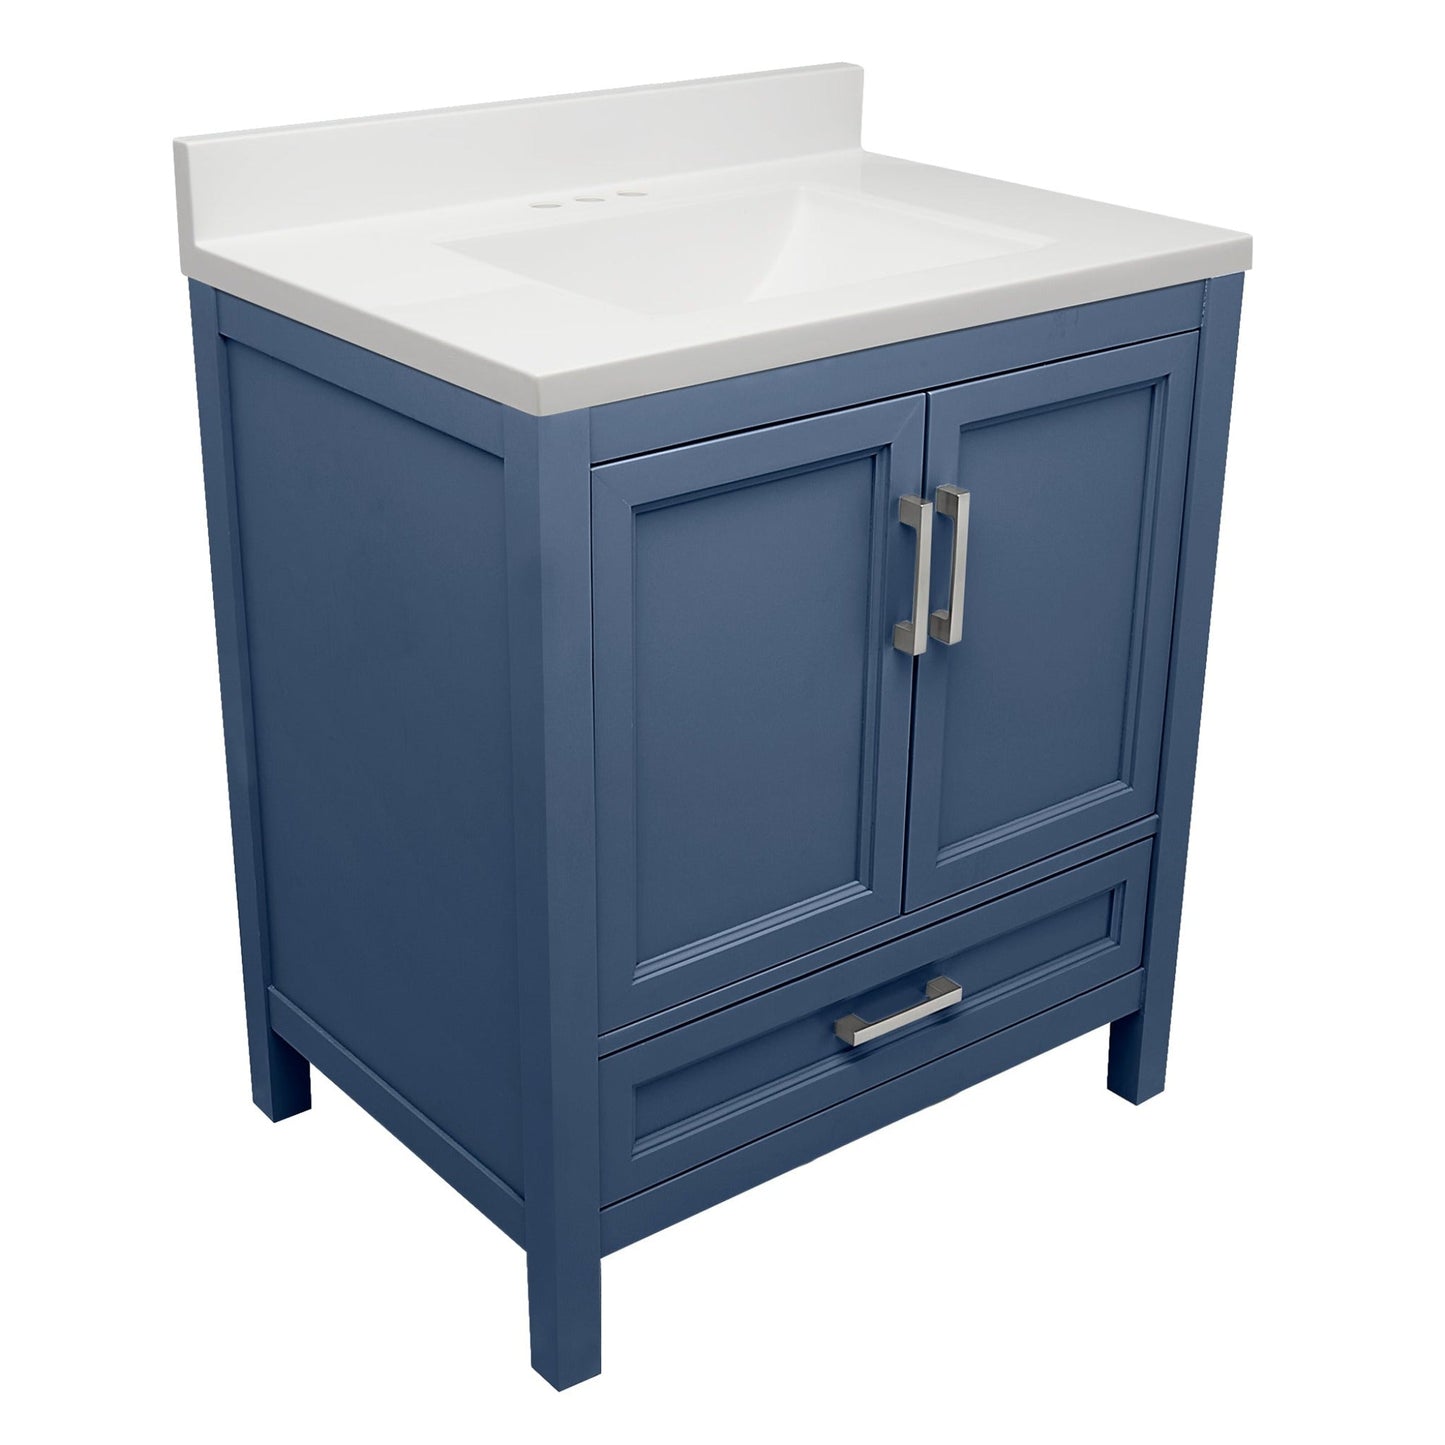 Ella’s Bubbles Nevado 31" Navy Blue Bathroom Vanity With White Cultured Marble Top With White Backsplash and Sink